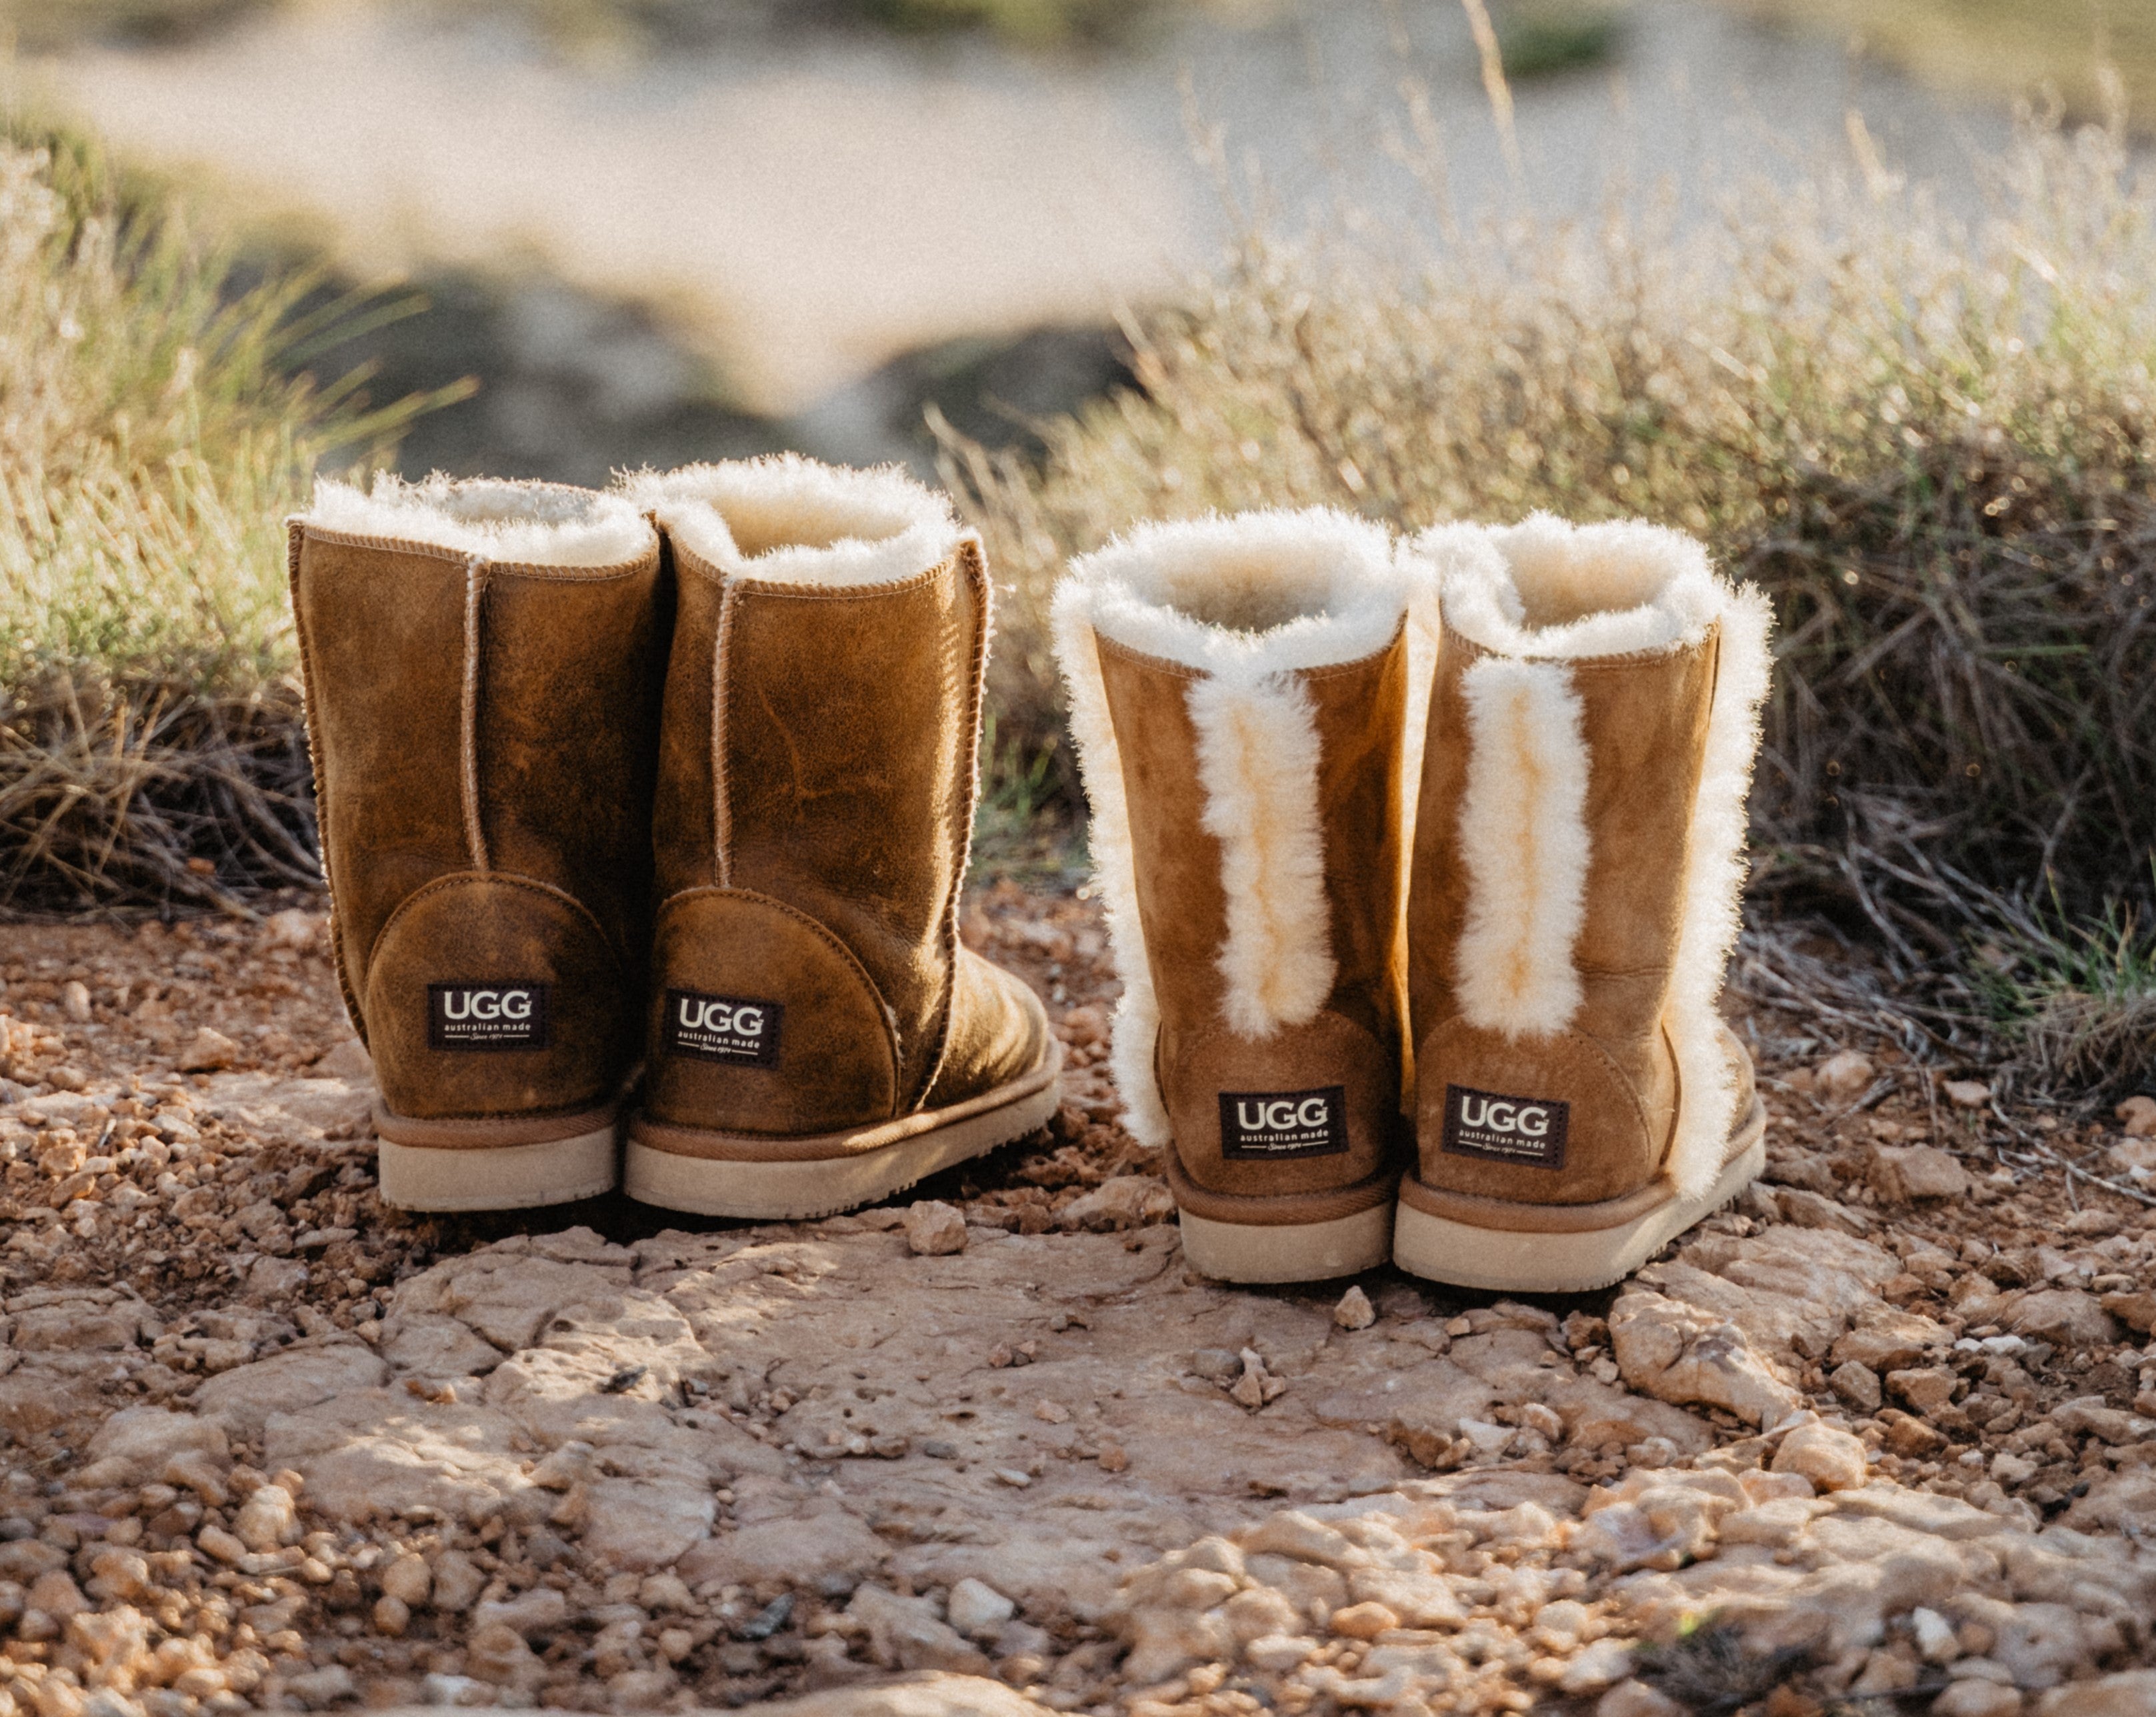 UGG Vs. UGG Since 1974: What's the Difference?